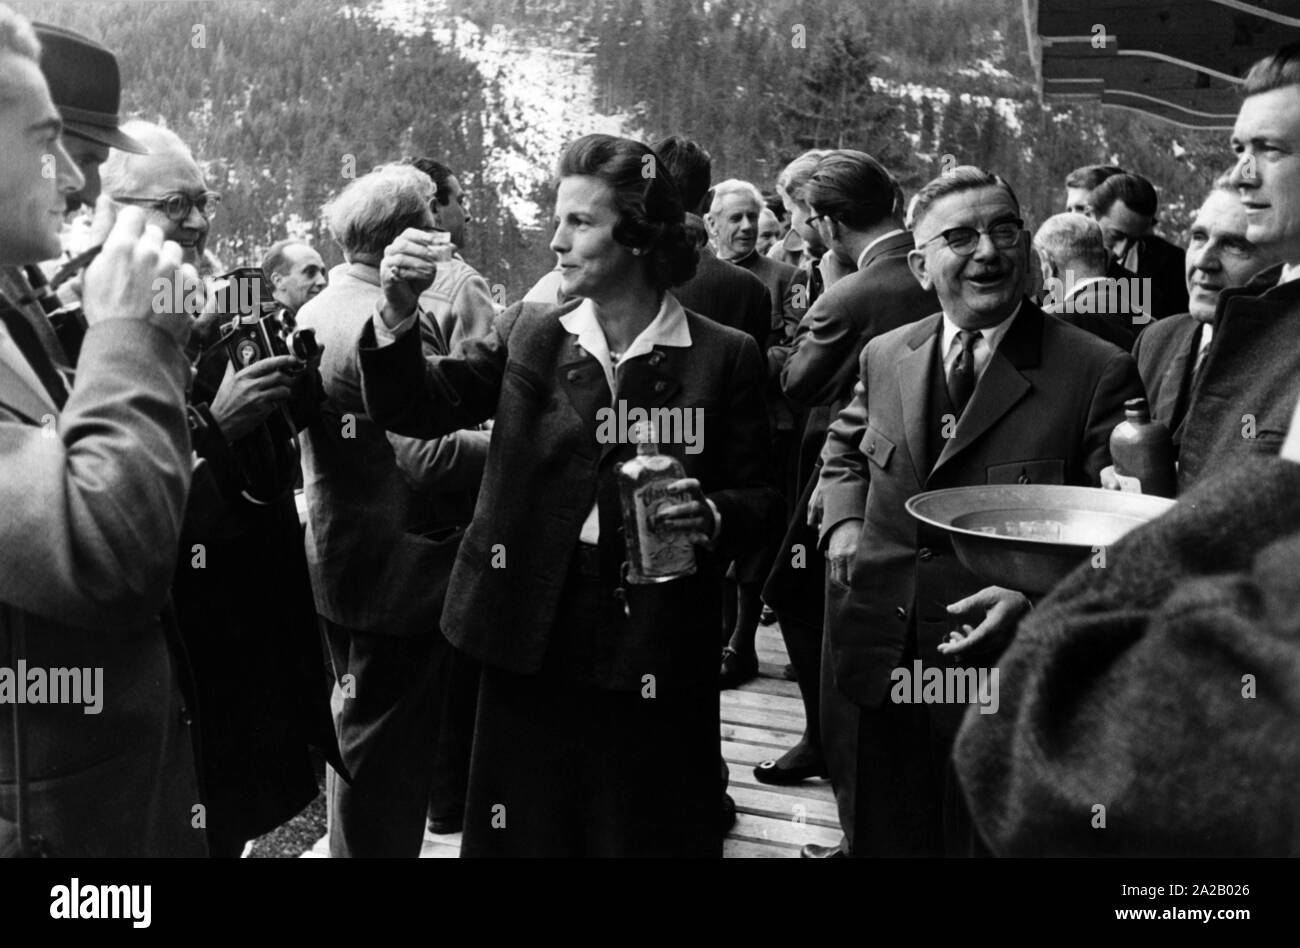 Lilian, the Princess of Réthy (middle), and the Austrian politician Leopold Figl (left) at a chamois hunt in Hinterriss in 1959. The princess holds a shot glass and a bottle in her hands. Stock Photo